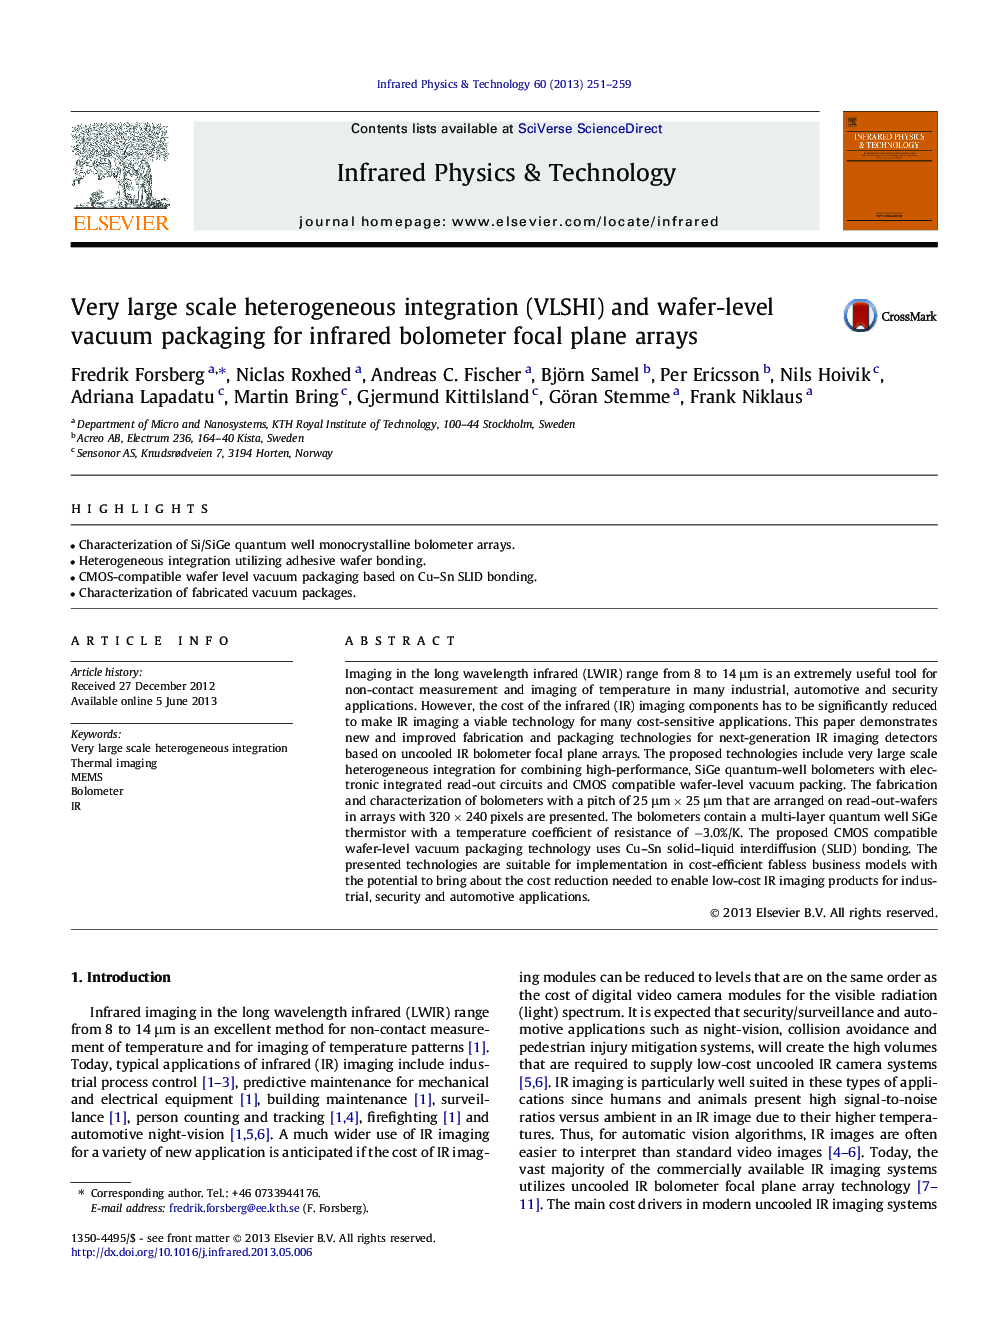 Very large scale heterogeneous integration (VLSHI) and wafer-level vacuum packaging for infrared bolometer focal plane arrays